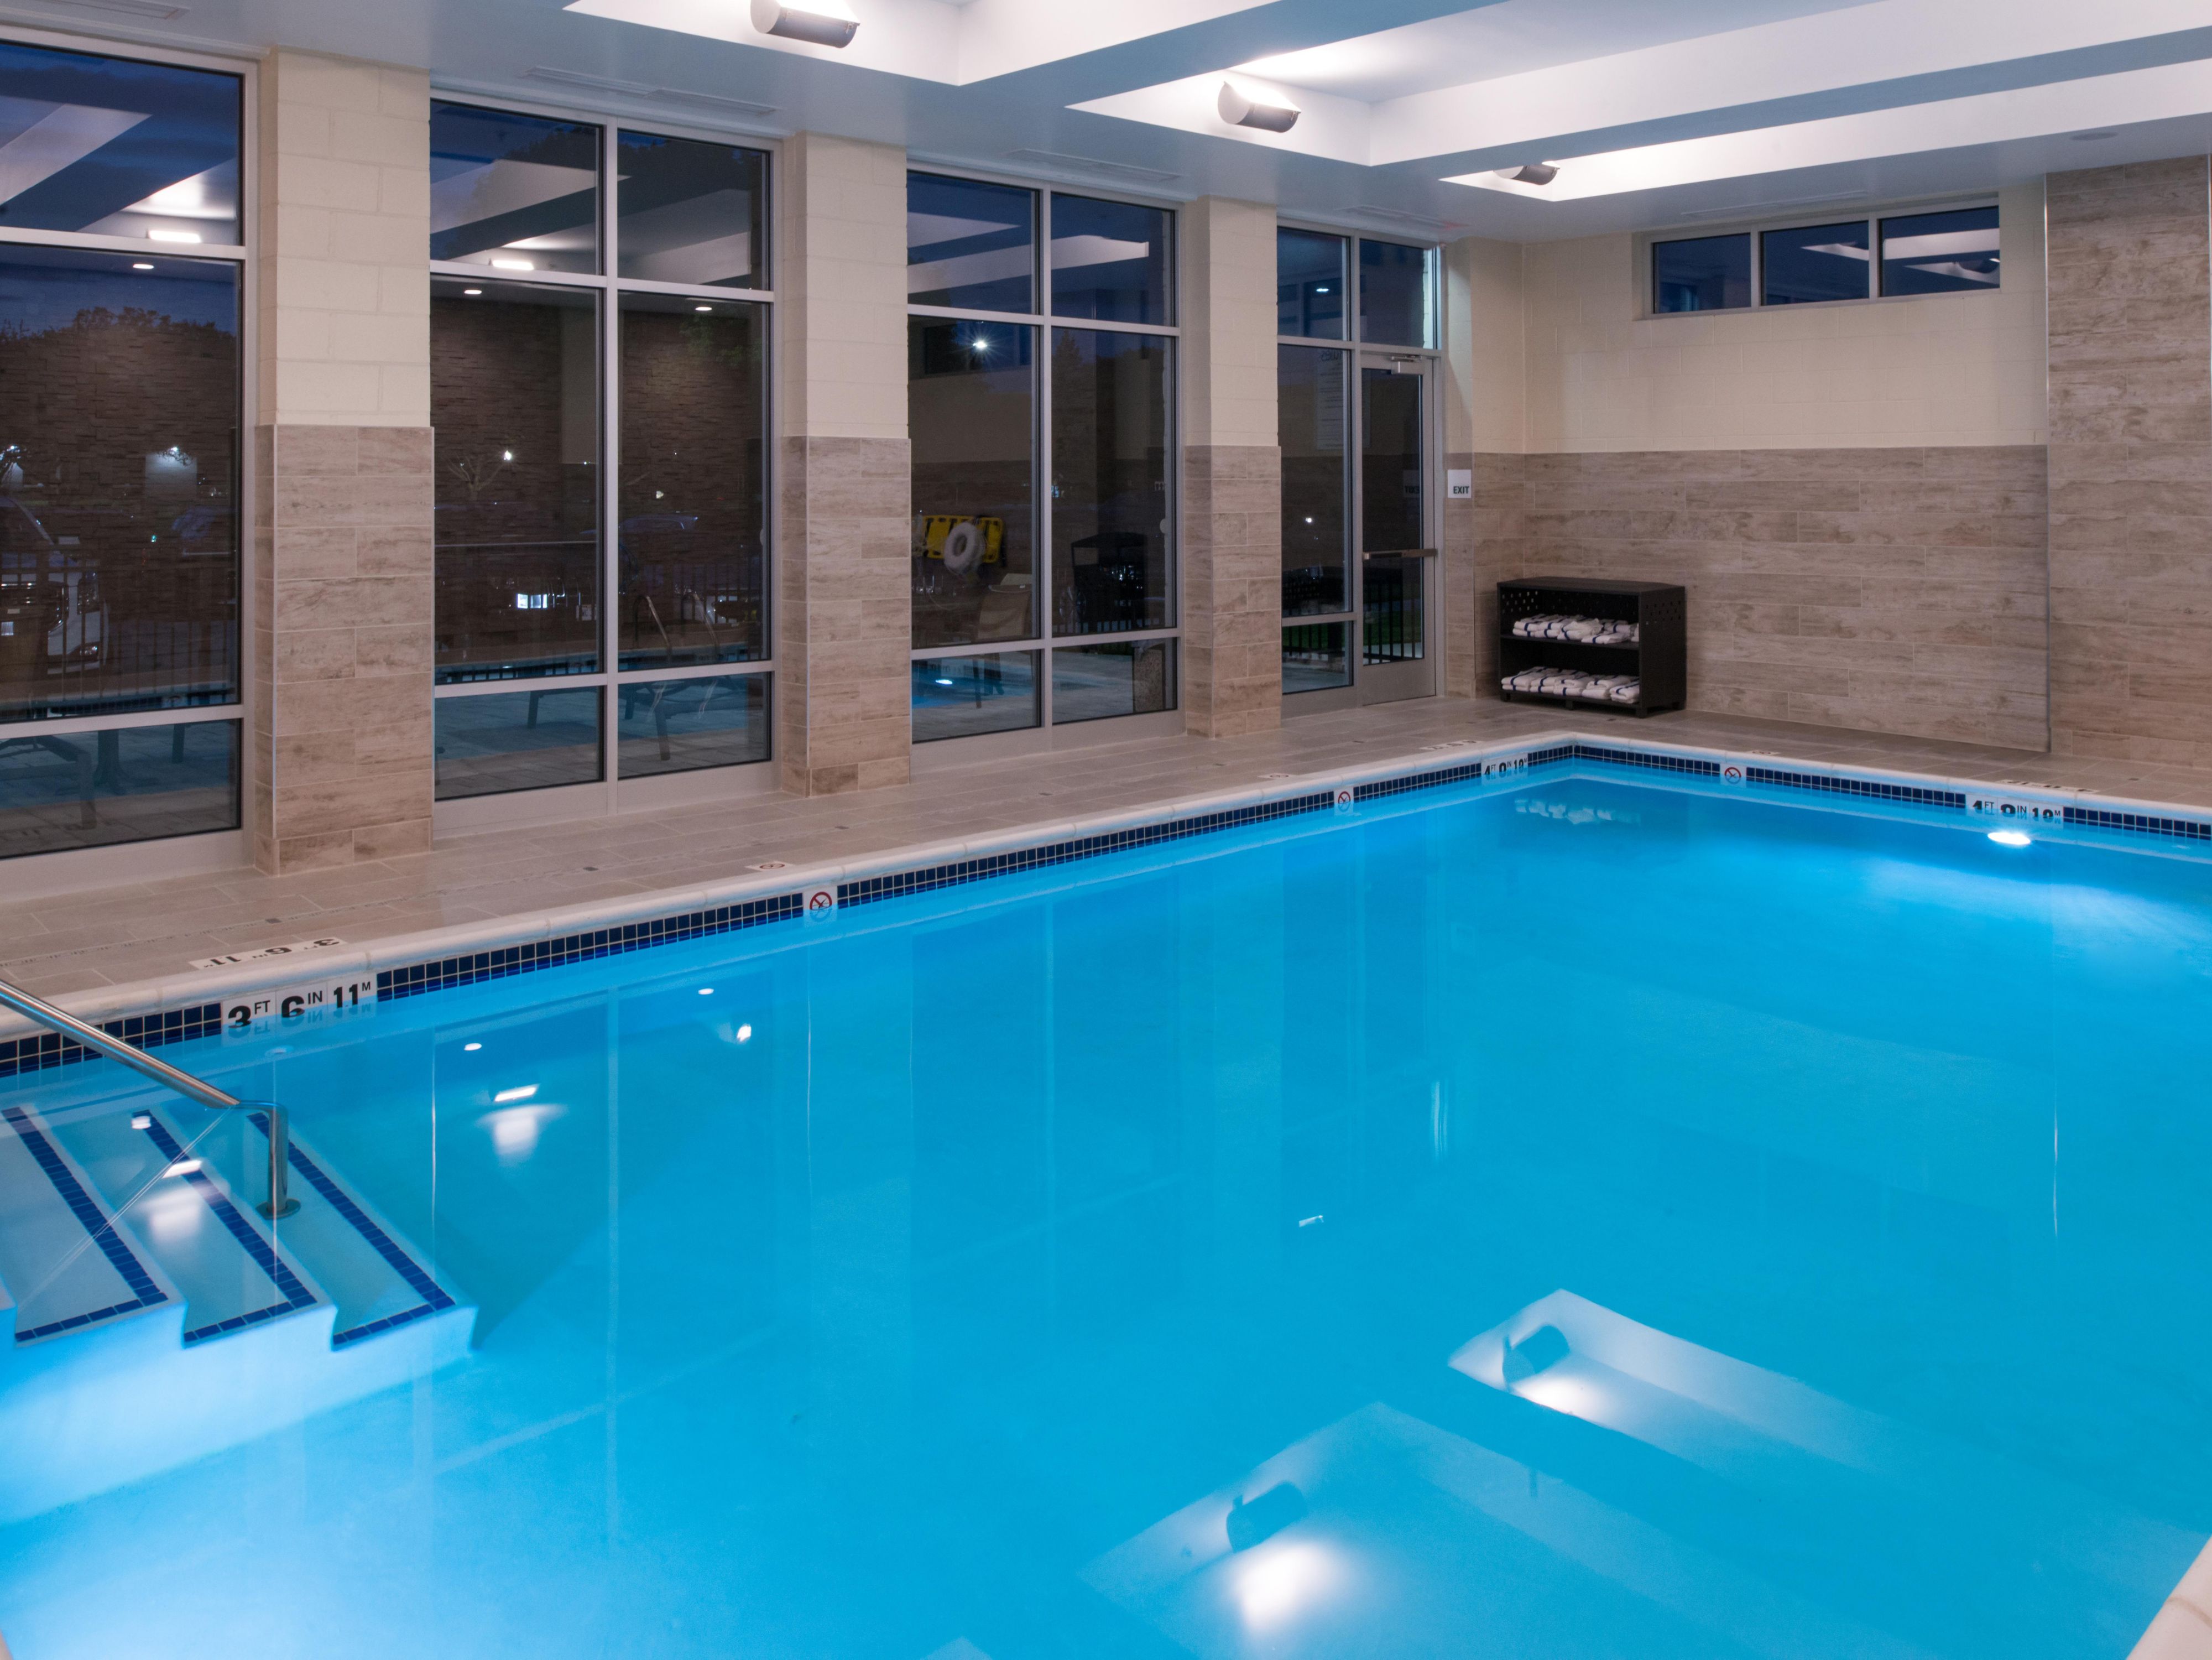 Start your day with a refreshing dip in our heated indoor pool and whirlpool. Bring the family back down for some evening fun after a busy day in the town. Our pool and whirlpool both have ADA-compliant pool lifts so everyone can join in the fun. 